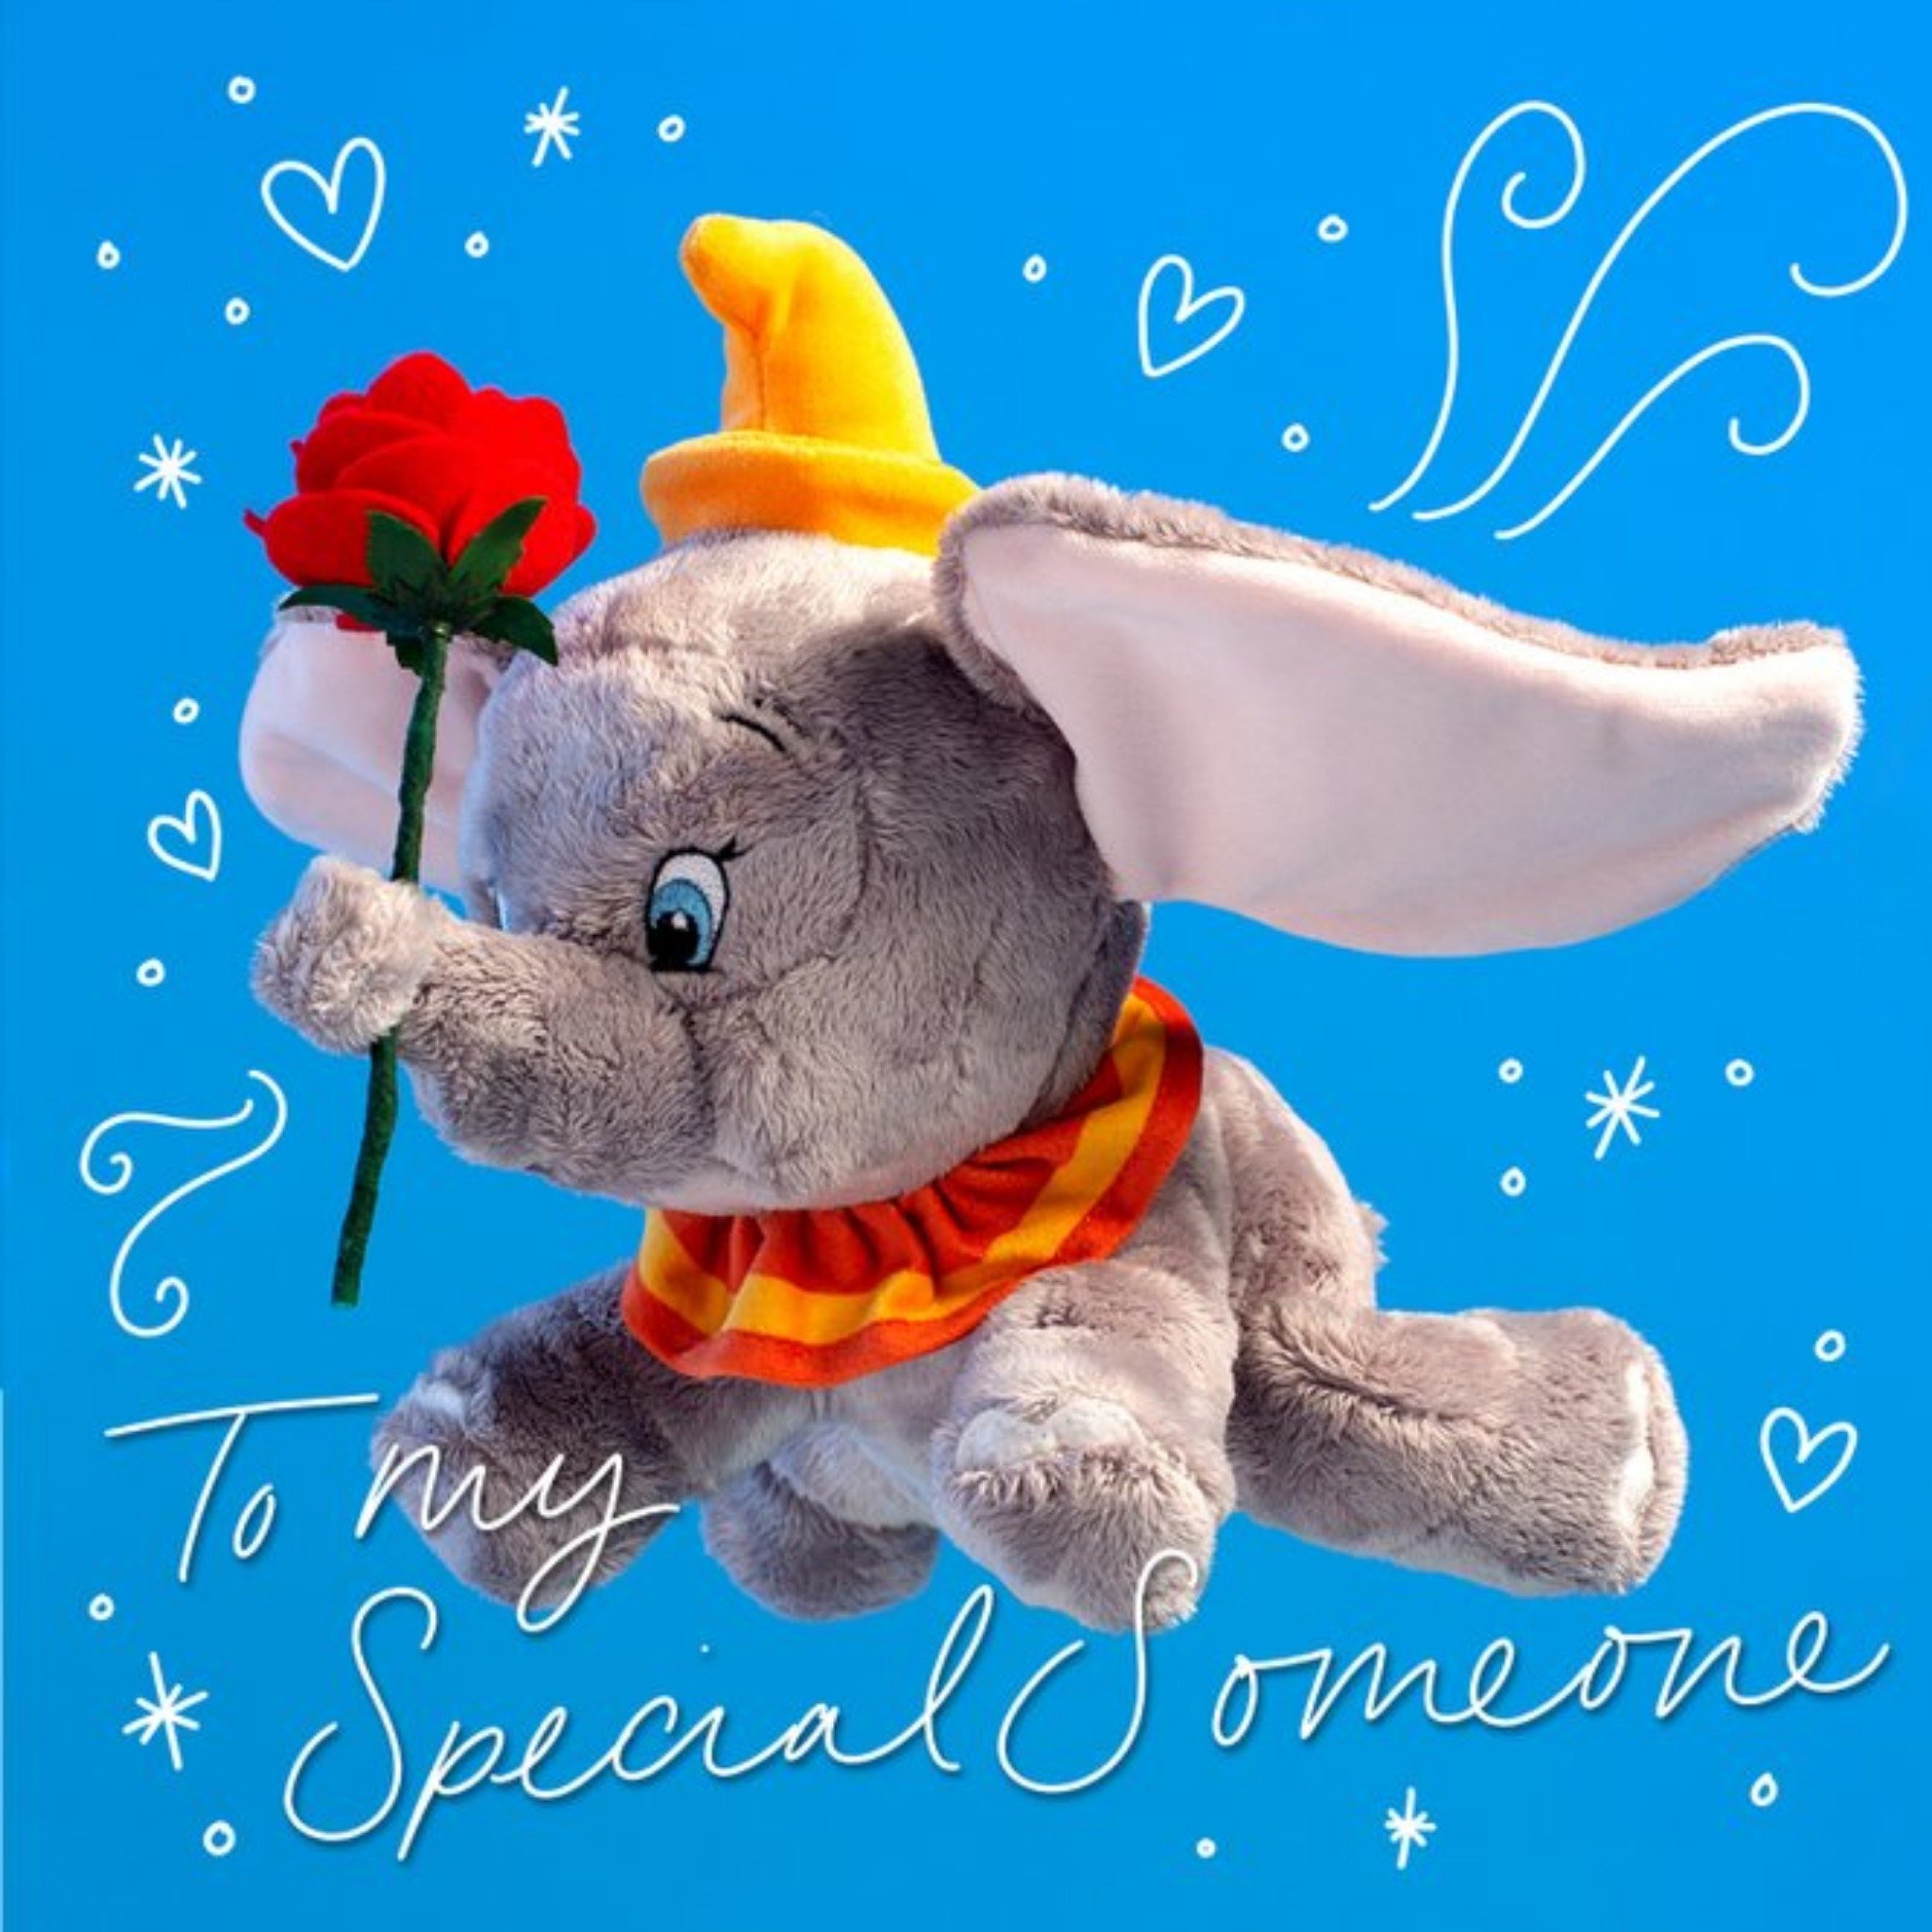 Cute Disney Plush Dumbo To My Special Someone Valentine's Day Card, Large